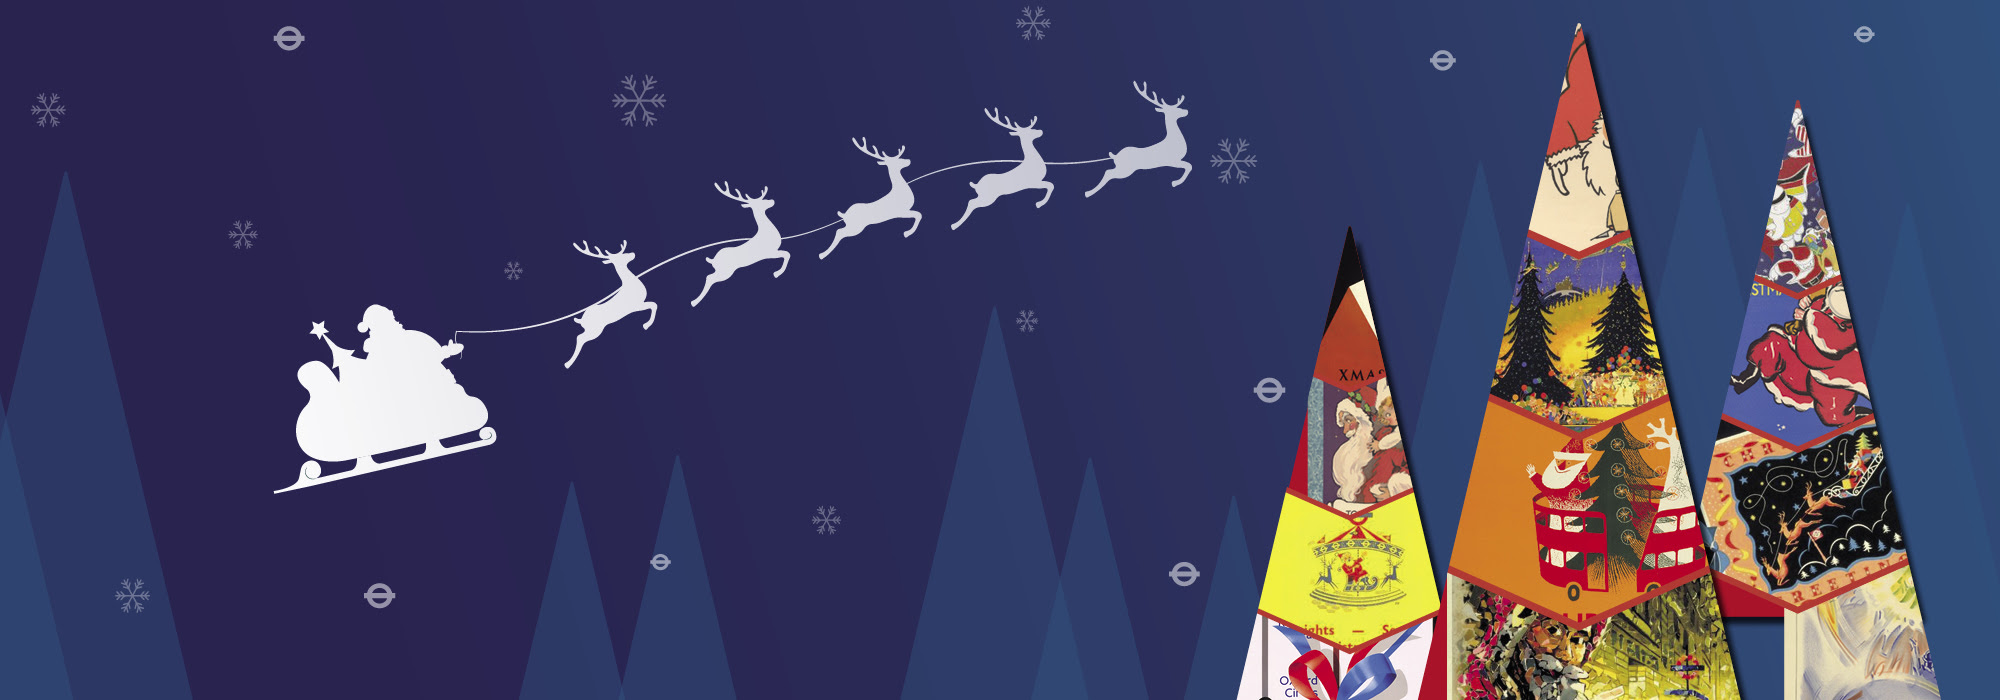 Christmas banner showing Santa's sleigh and reindeer flying over trees made of Christmas poster designs